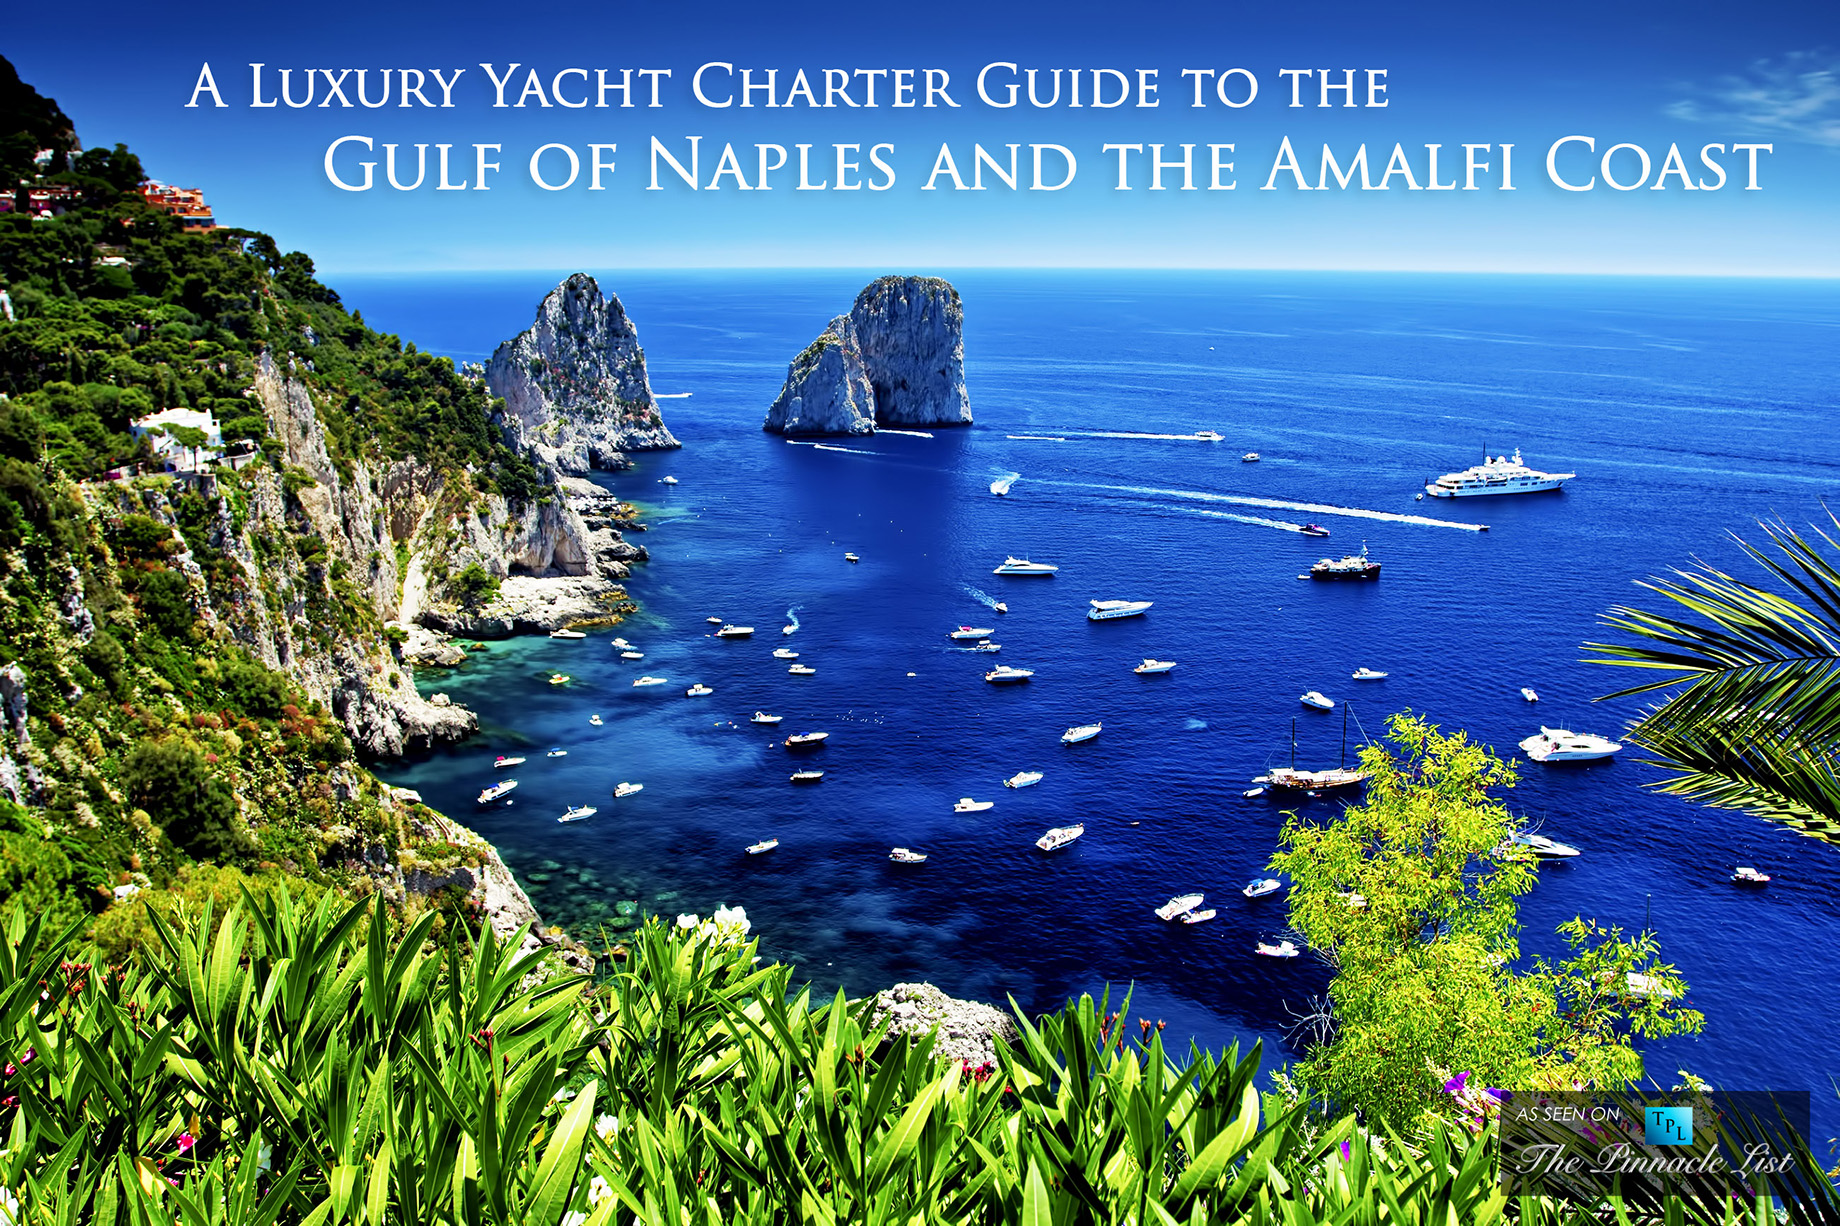 A Luxury Yacht Charter Guide to the Gulf of Naples and the Amalfi Coast